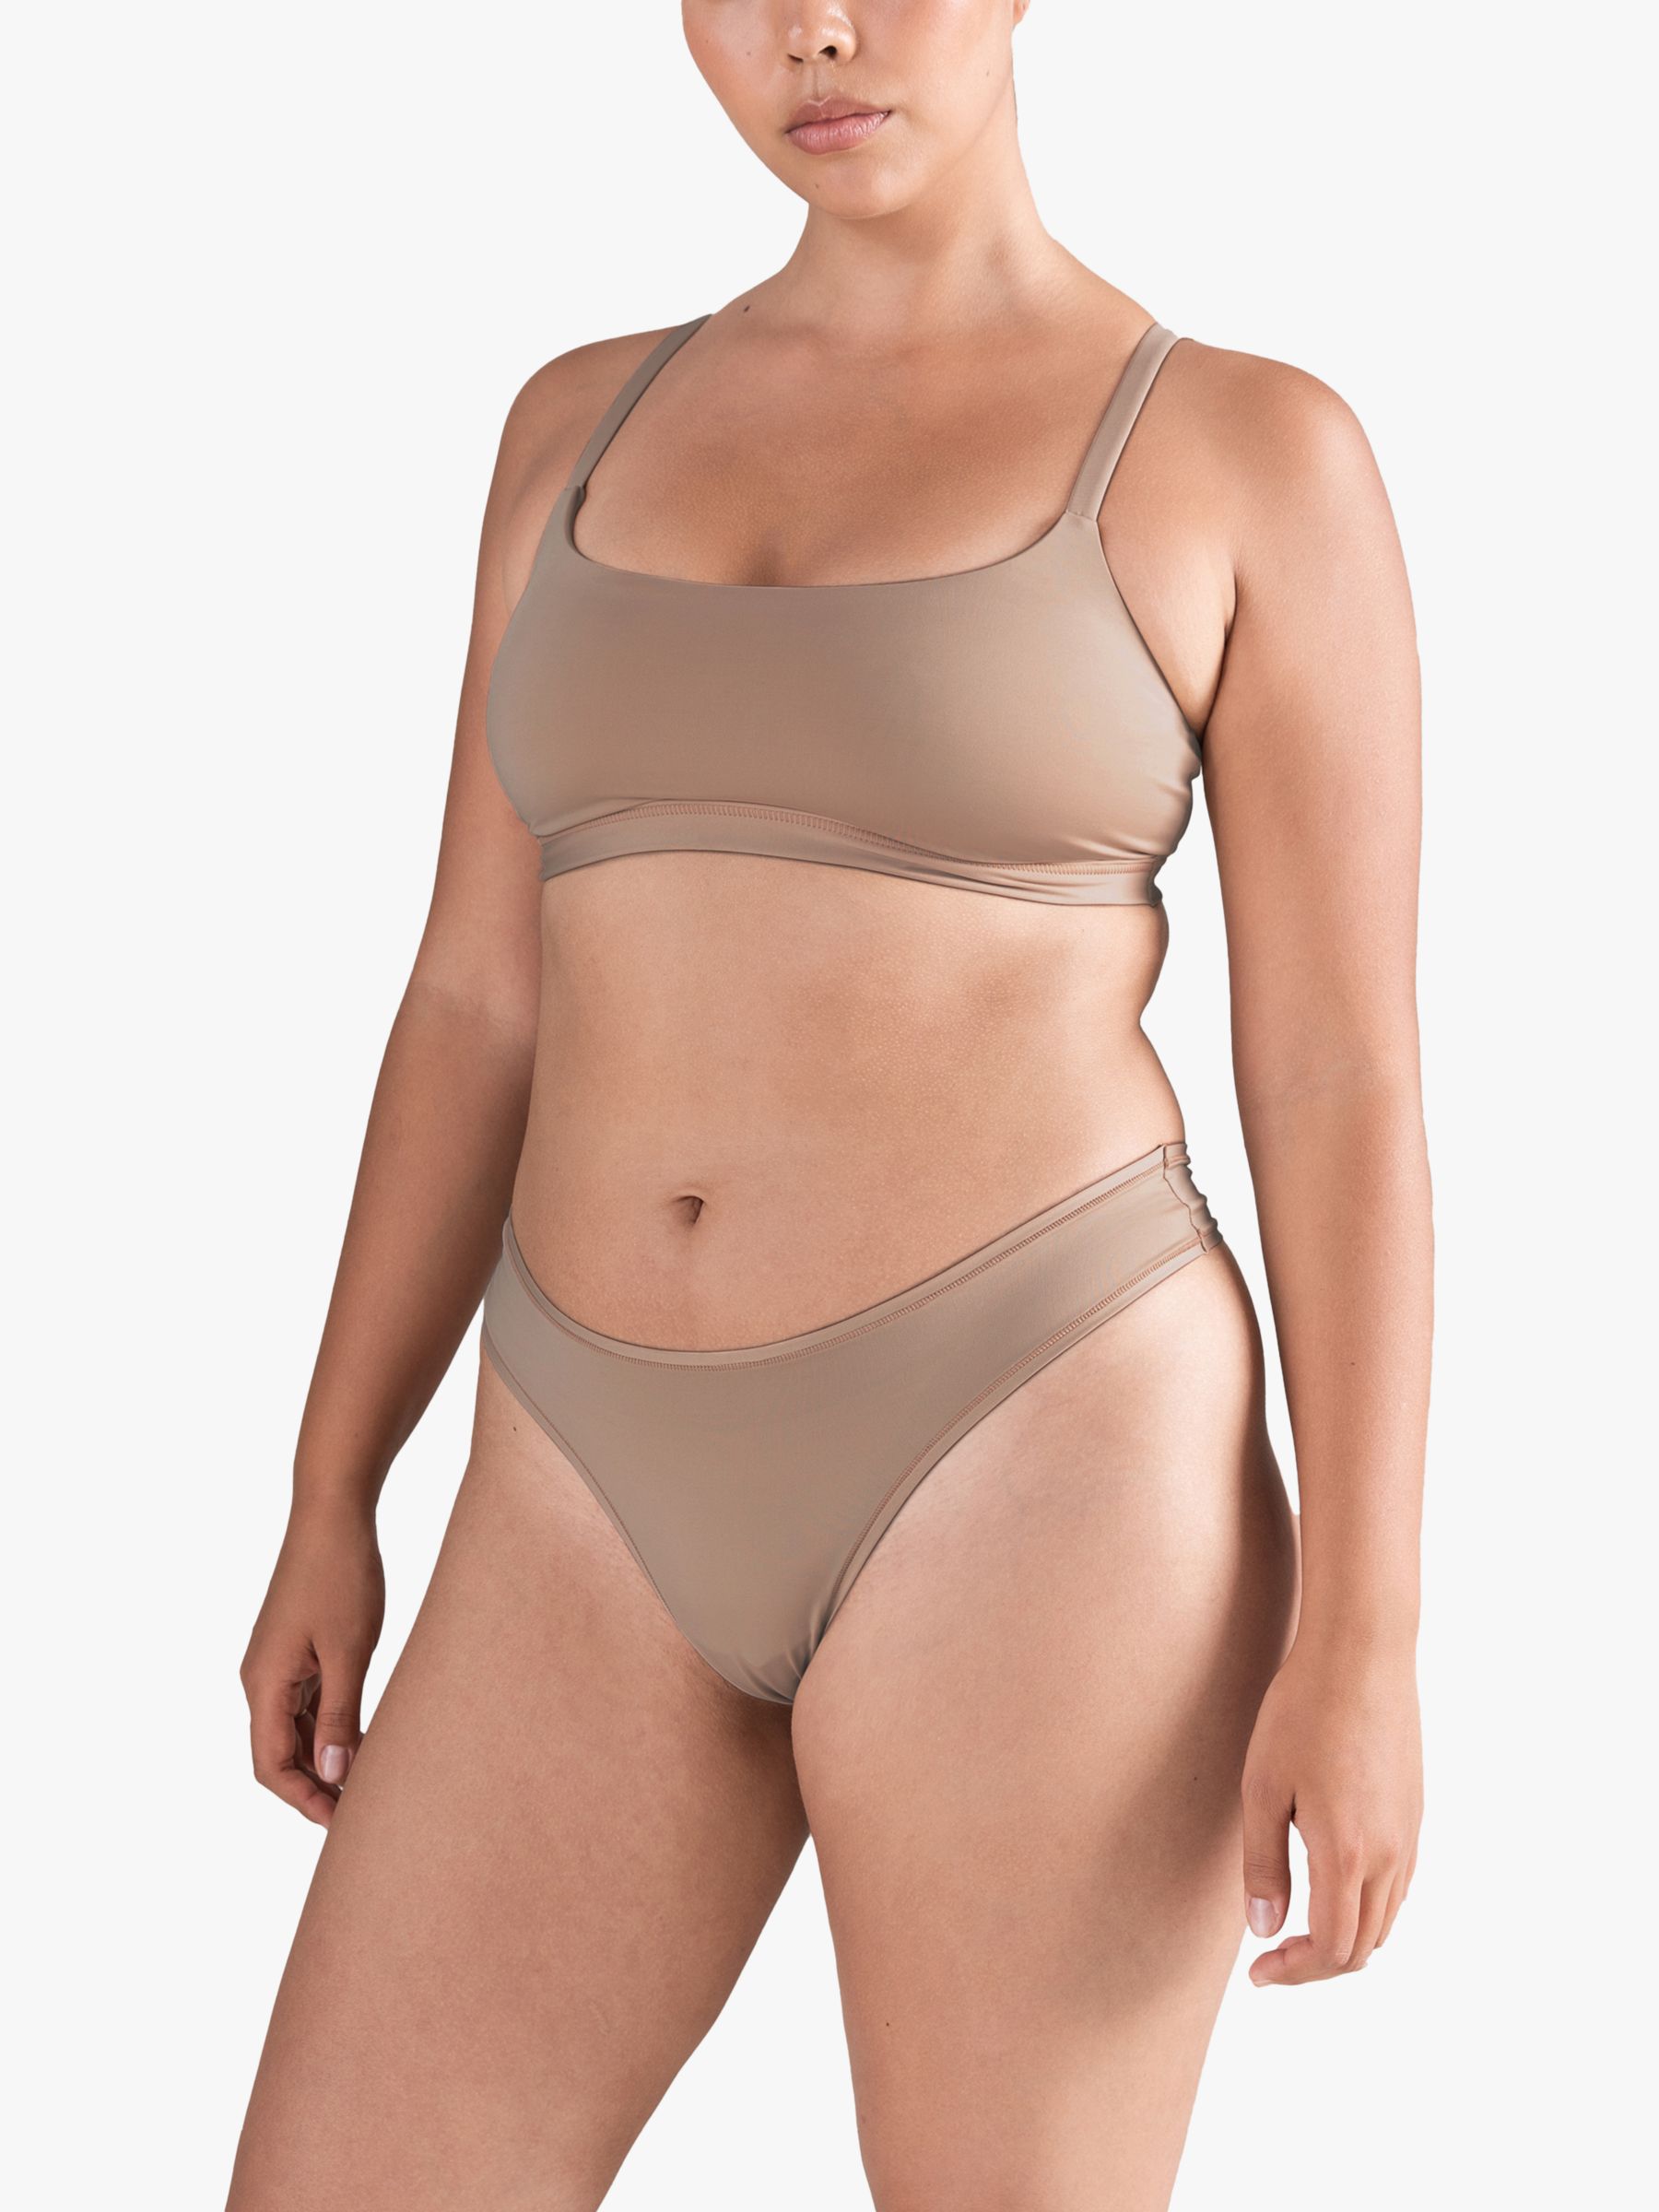 Nudea Second Skin Stretch Dipped Thong, Bare 03 at John Lewis